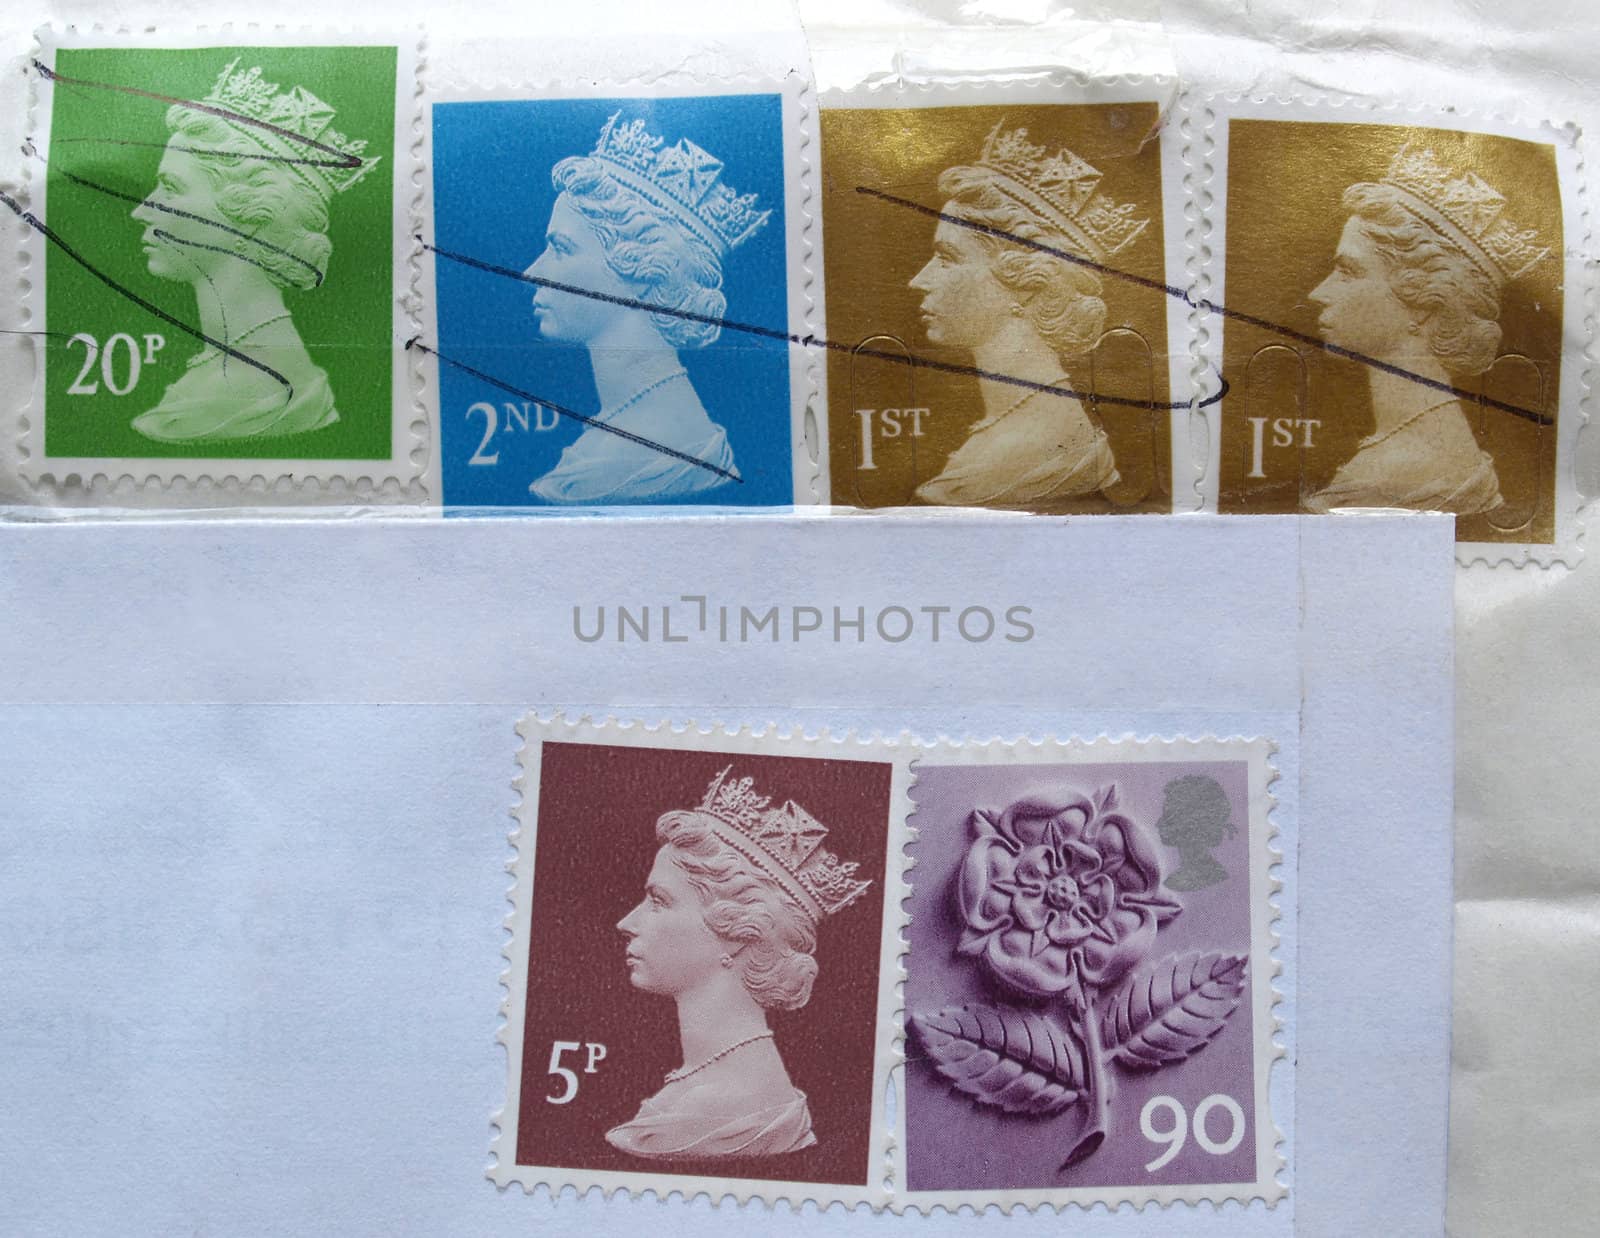 UK stamps by paolo77